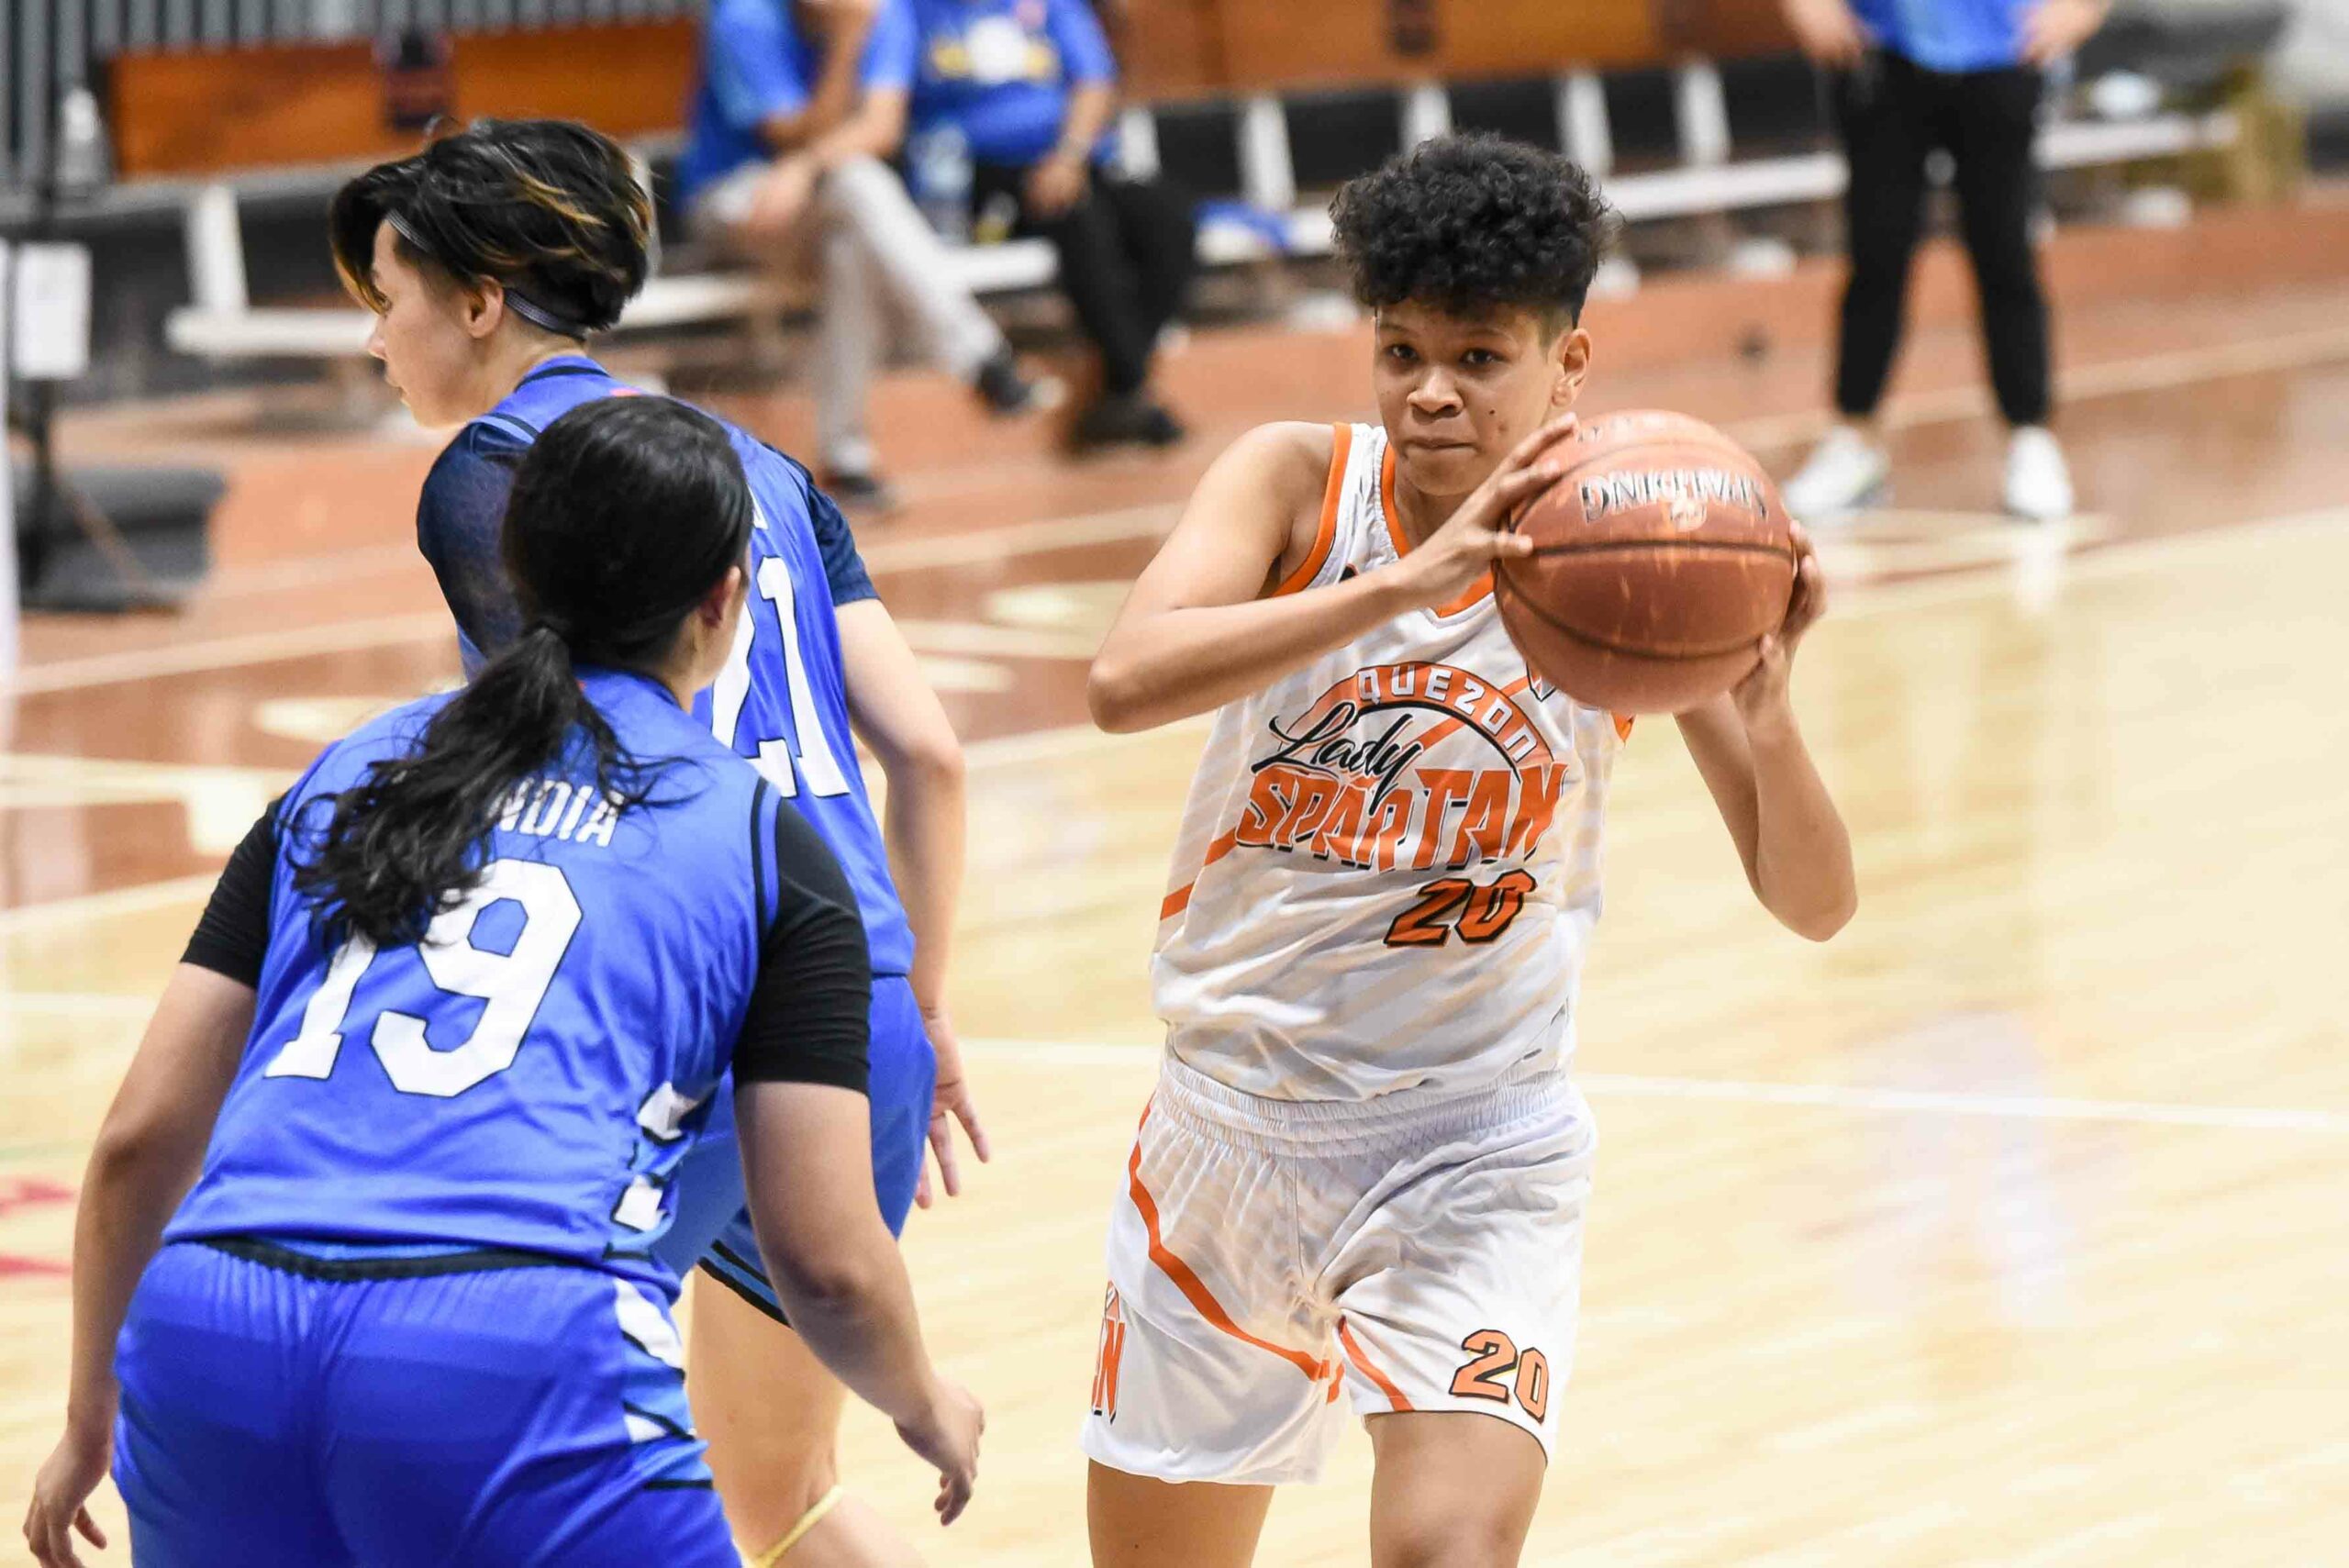 2021-PIA-WNBL-Quezon-vs-Pacific-Water-Chicky-Faraon-Lady-Spartans-scaled Peñaranda returns as Pacific Water stays alive in WNBL playoff race Basketball NBL News  - philippine sports news